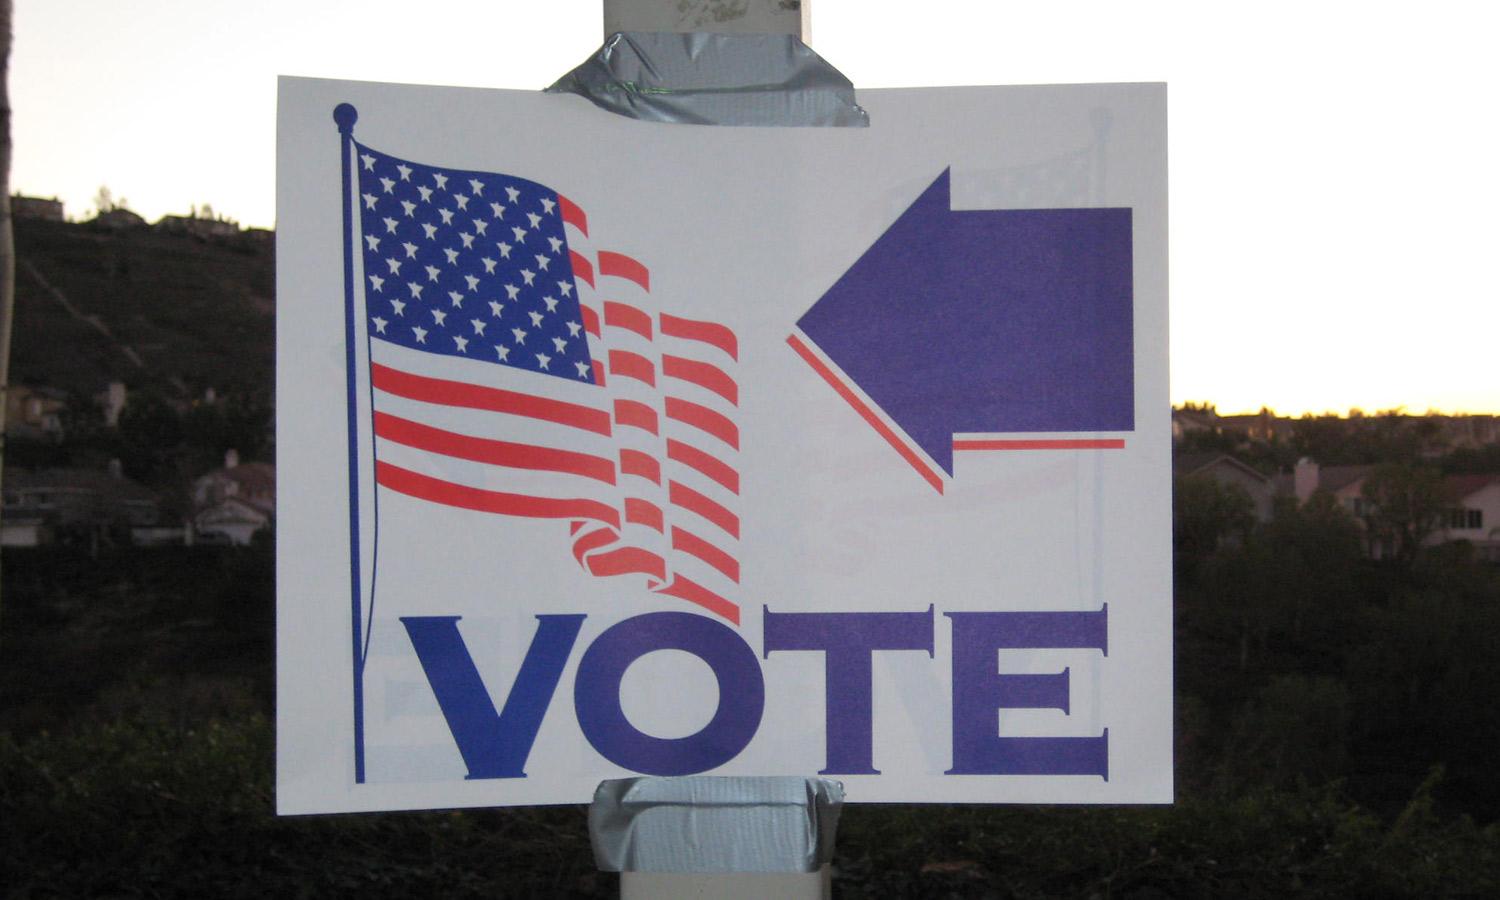 A voting sign on a lamppost with American flag